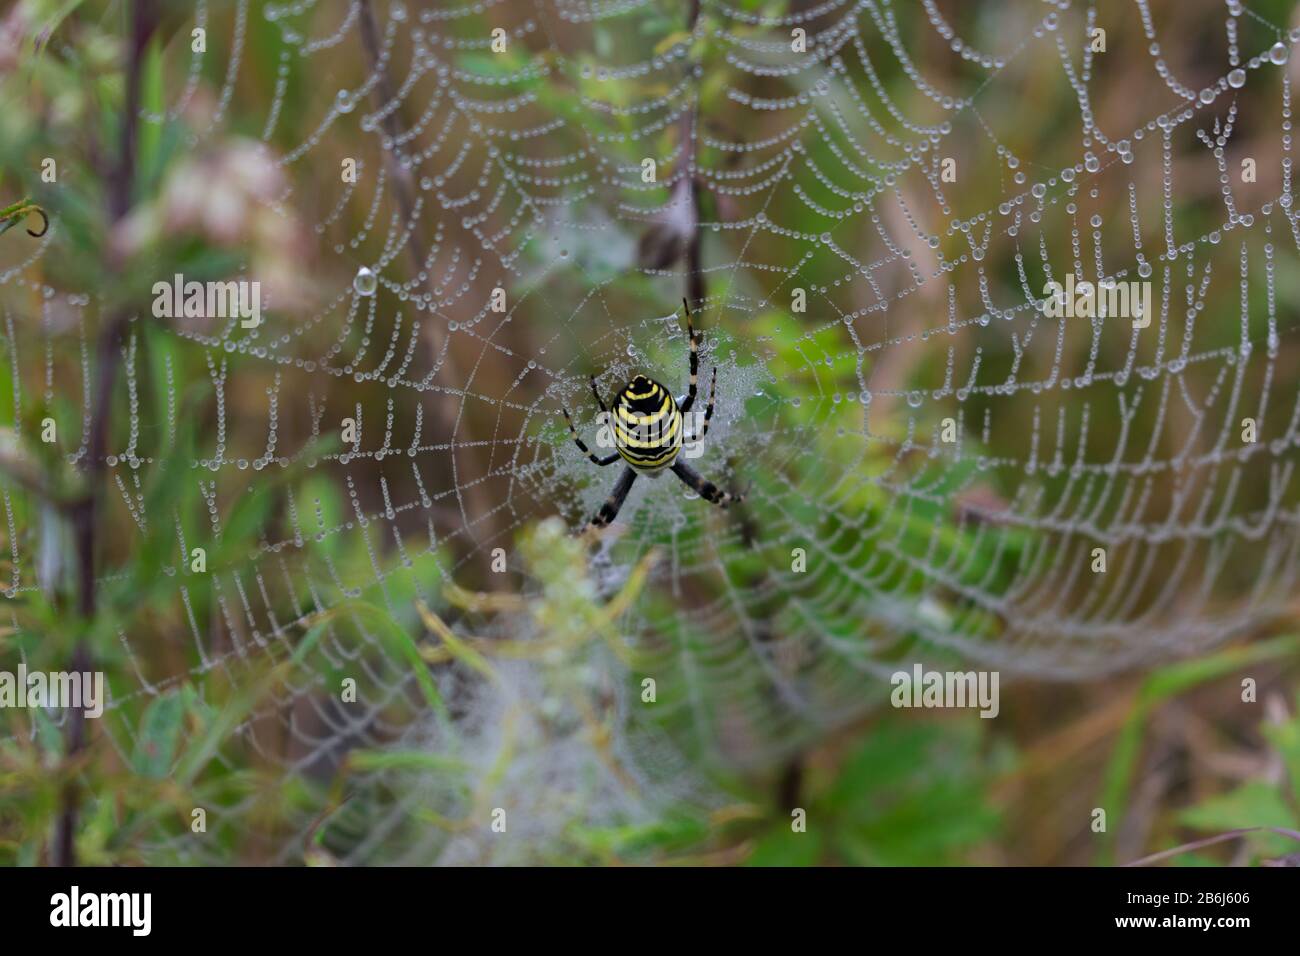 Large yellow garden spider (Argiope aurantia) on spider web. Morning dew on a spider web. Stock Photo